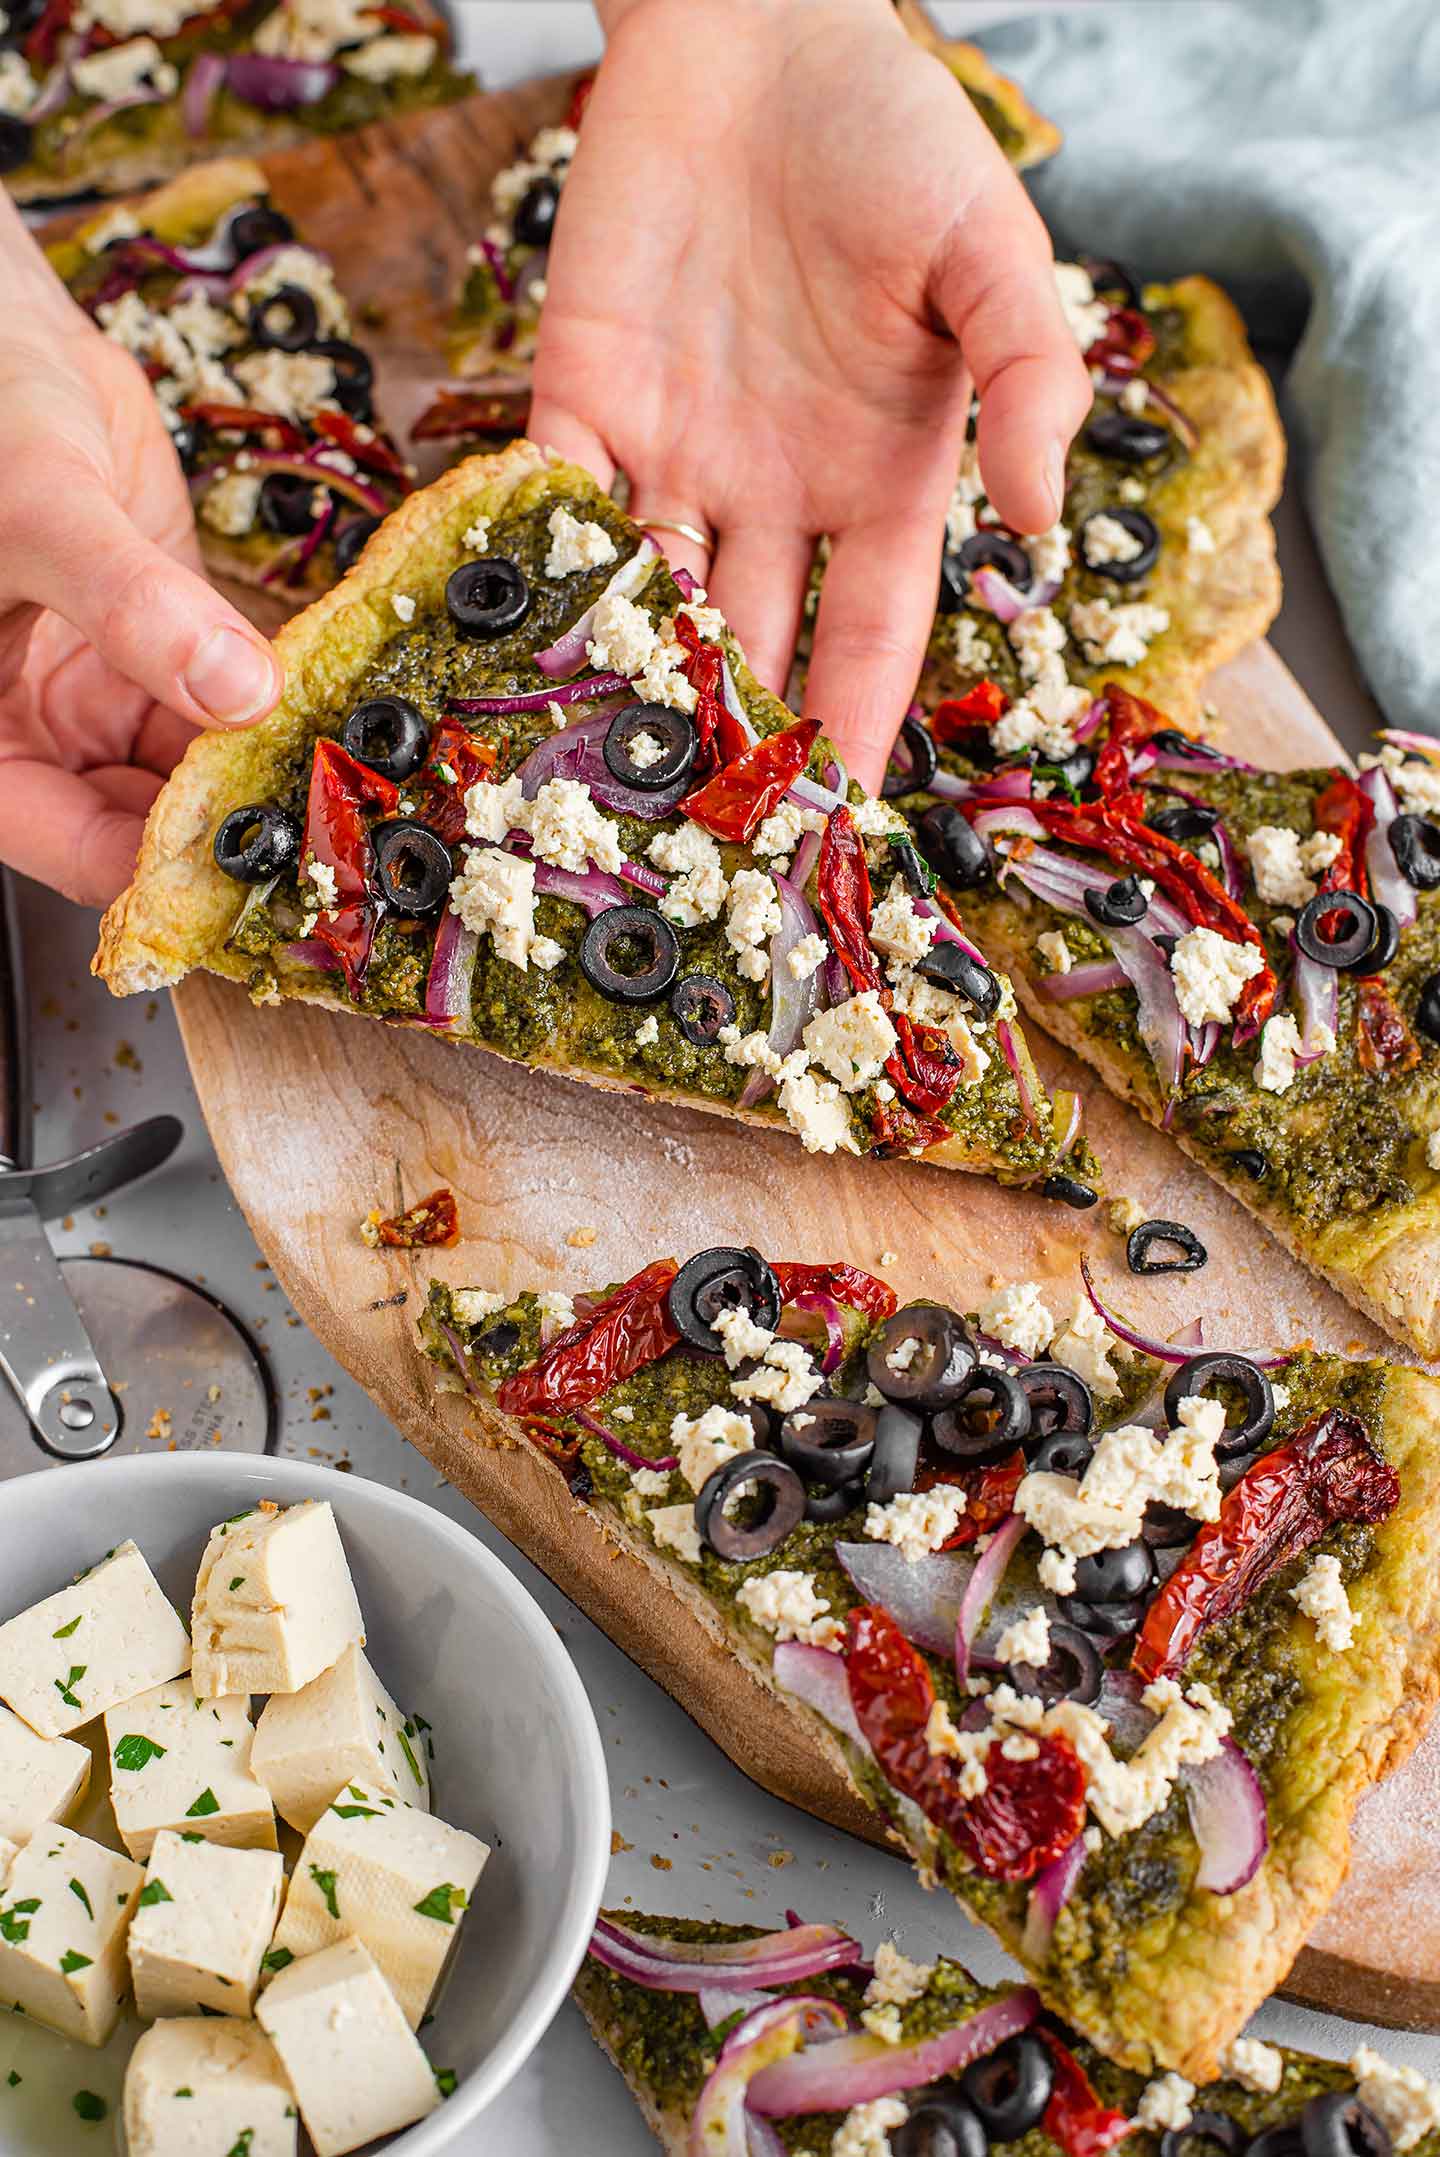 Top down view of a hand lifting a slice of thin crust pesto pizza with feta crumble from a wooden tray. Extra feta fills a small dish and other slices are scattered around.